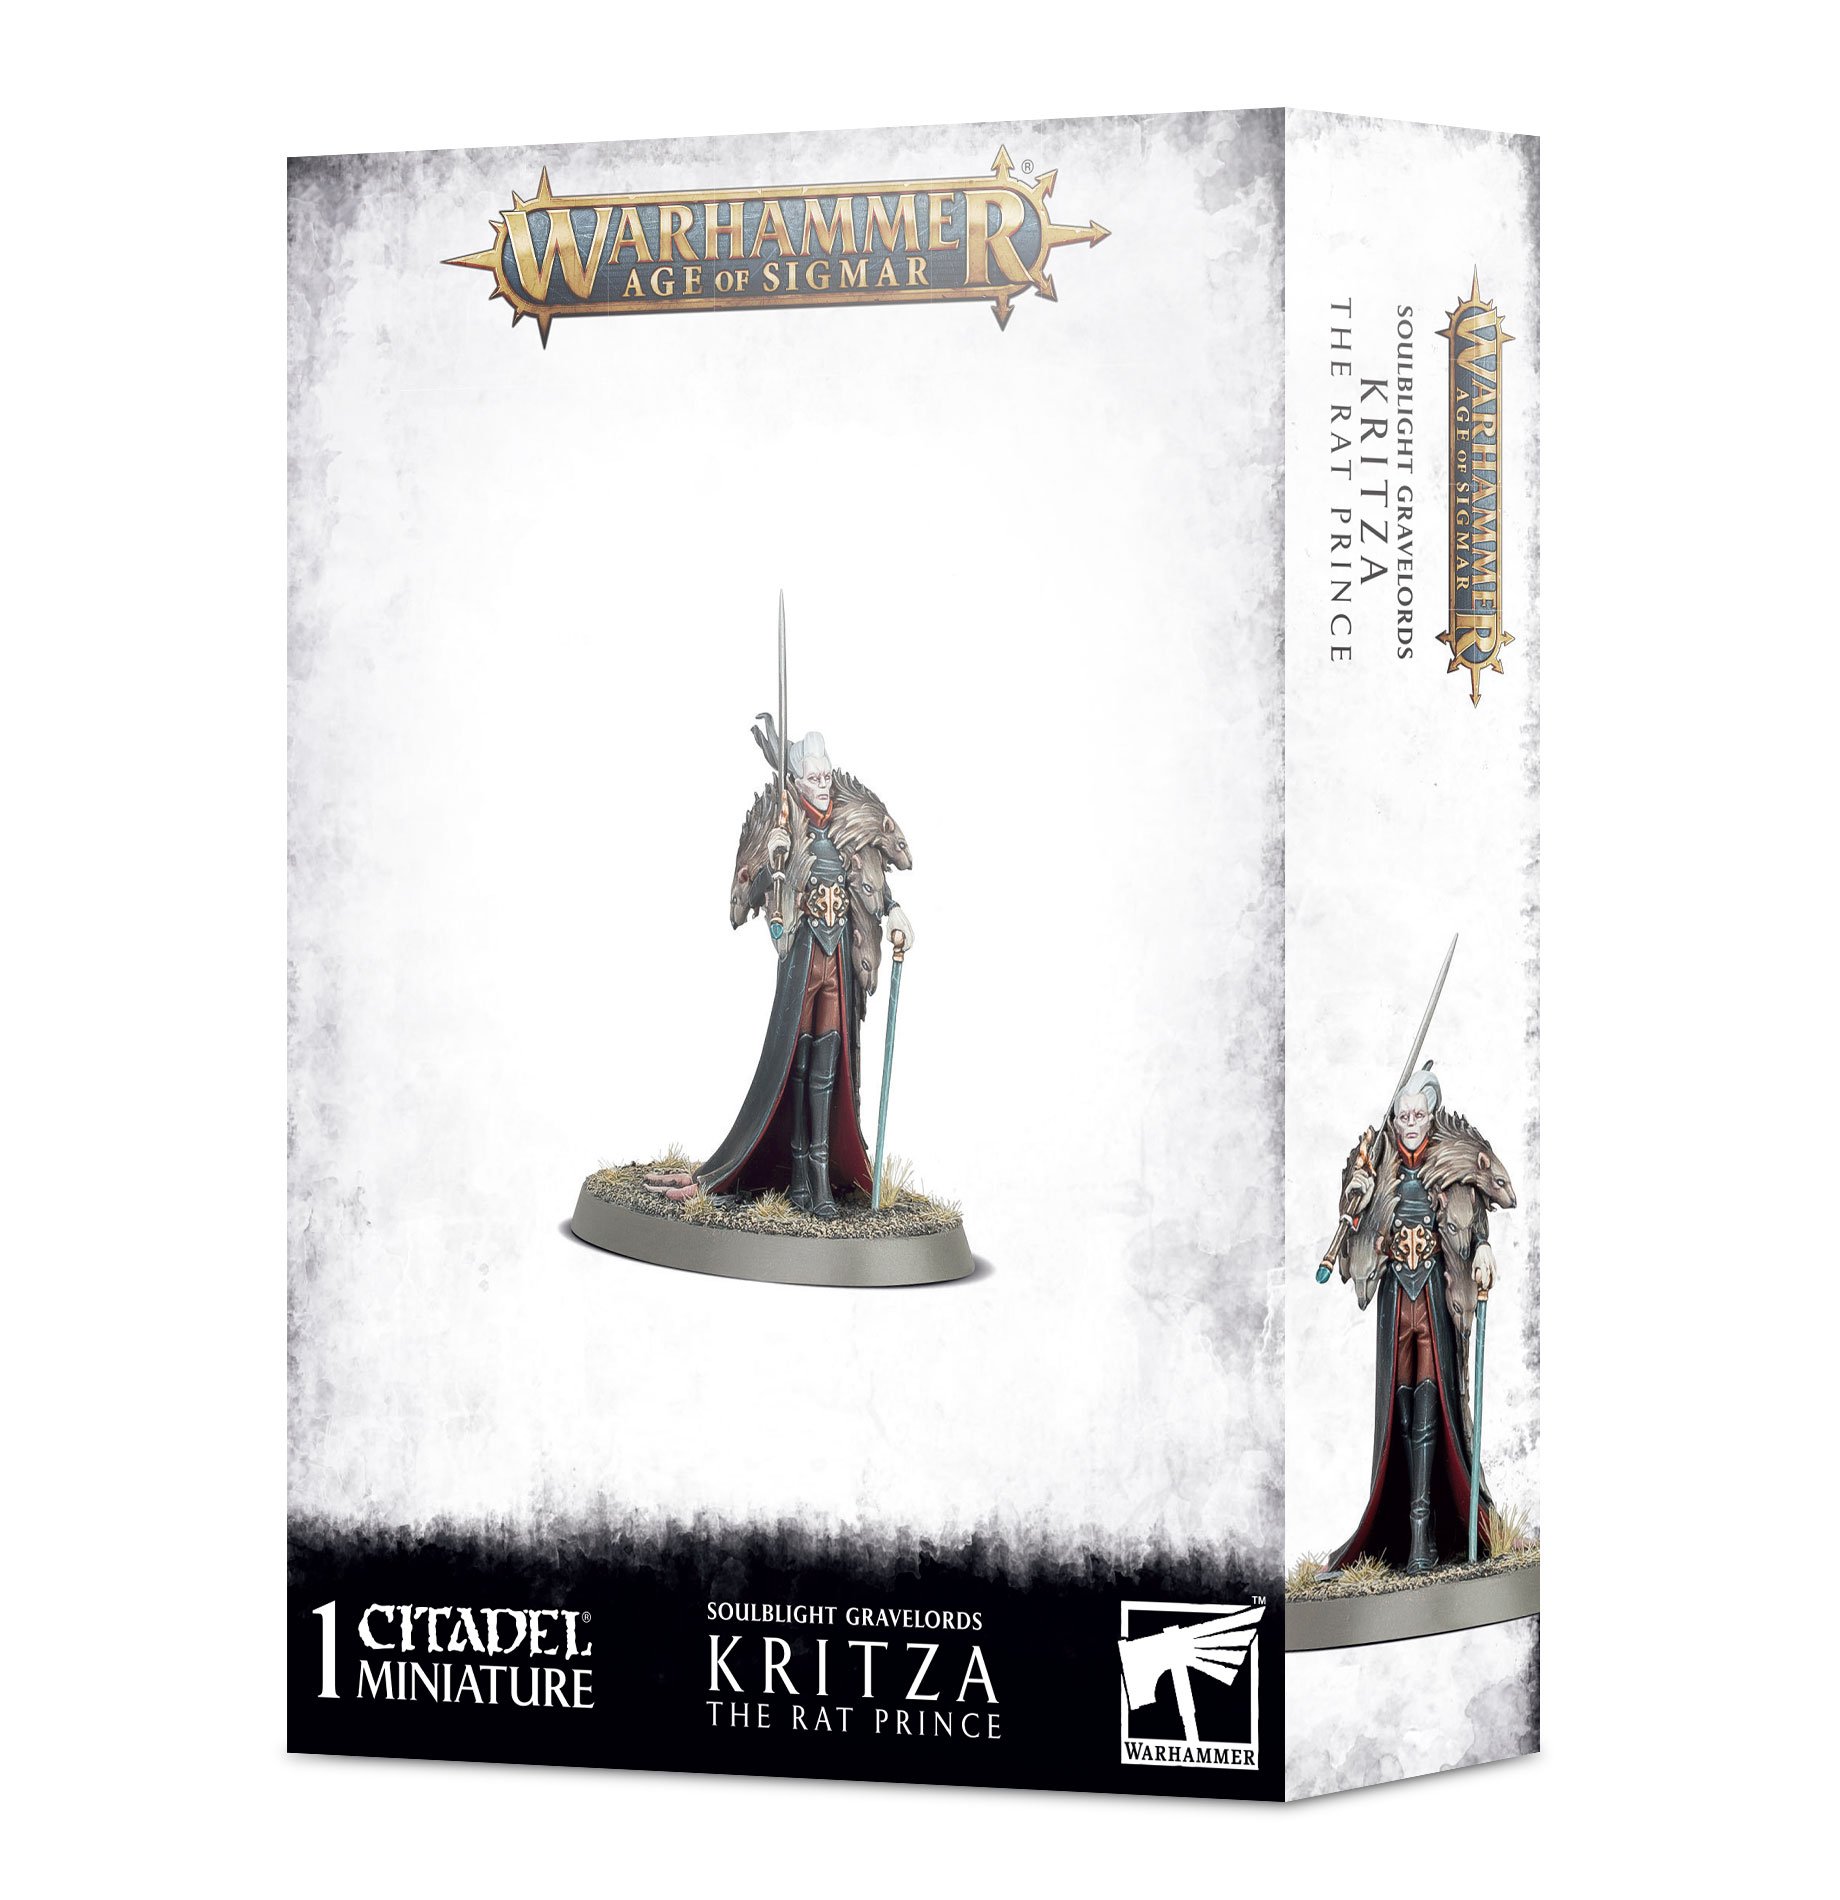 Warhammer Age Of Sigmar: Soulblight Gravelords: Kritza - The Rat Prince 